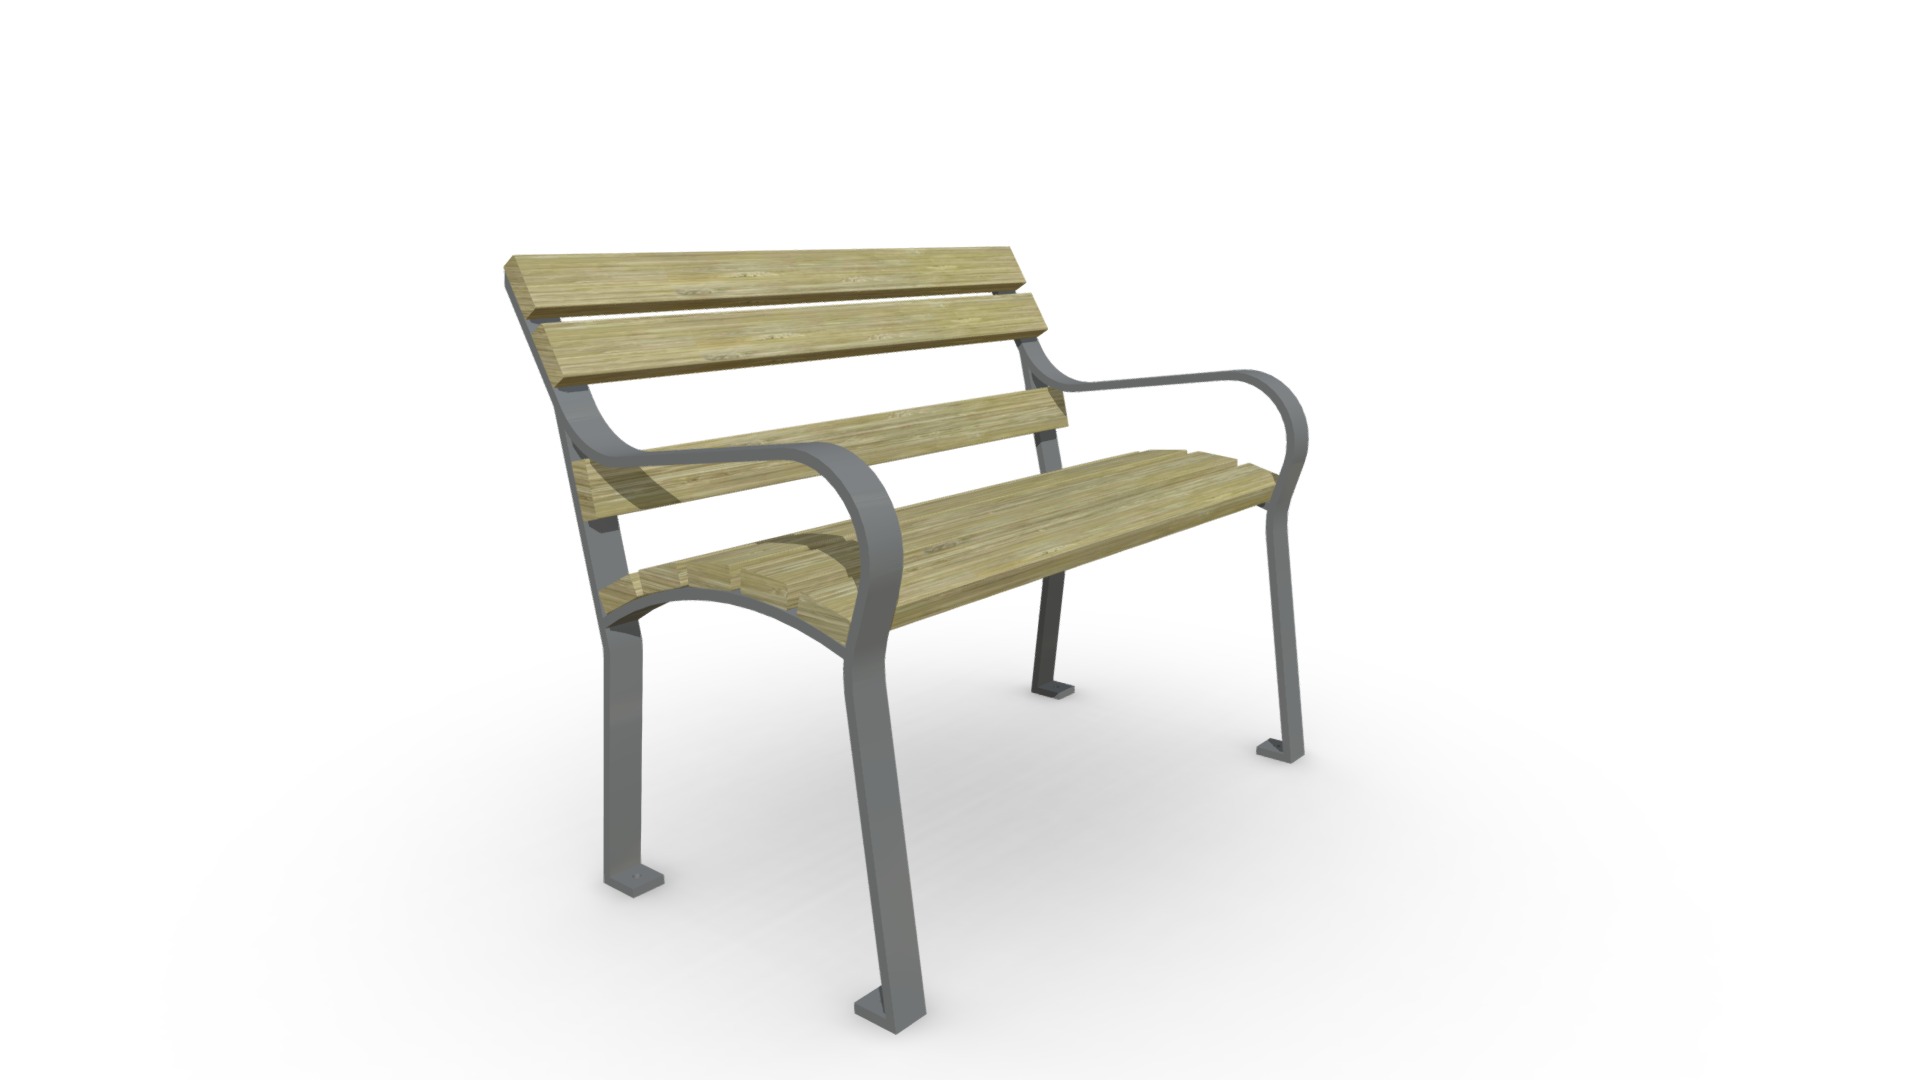 3D model SC-09.1,0 - This is a 3D model of the SC-09.1,0. The 3D model is about a wooden chair with a cushion.